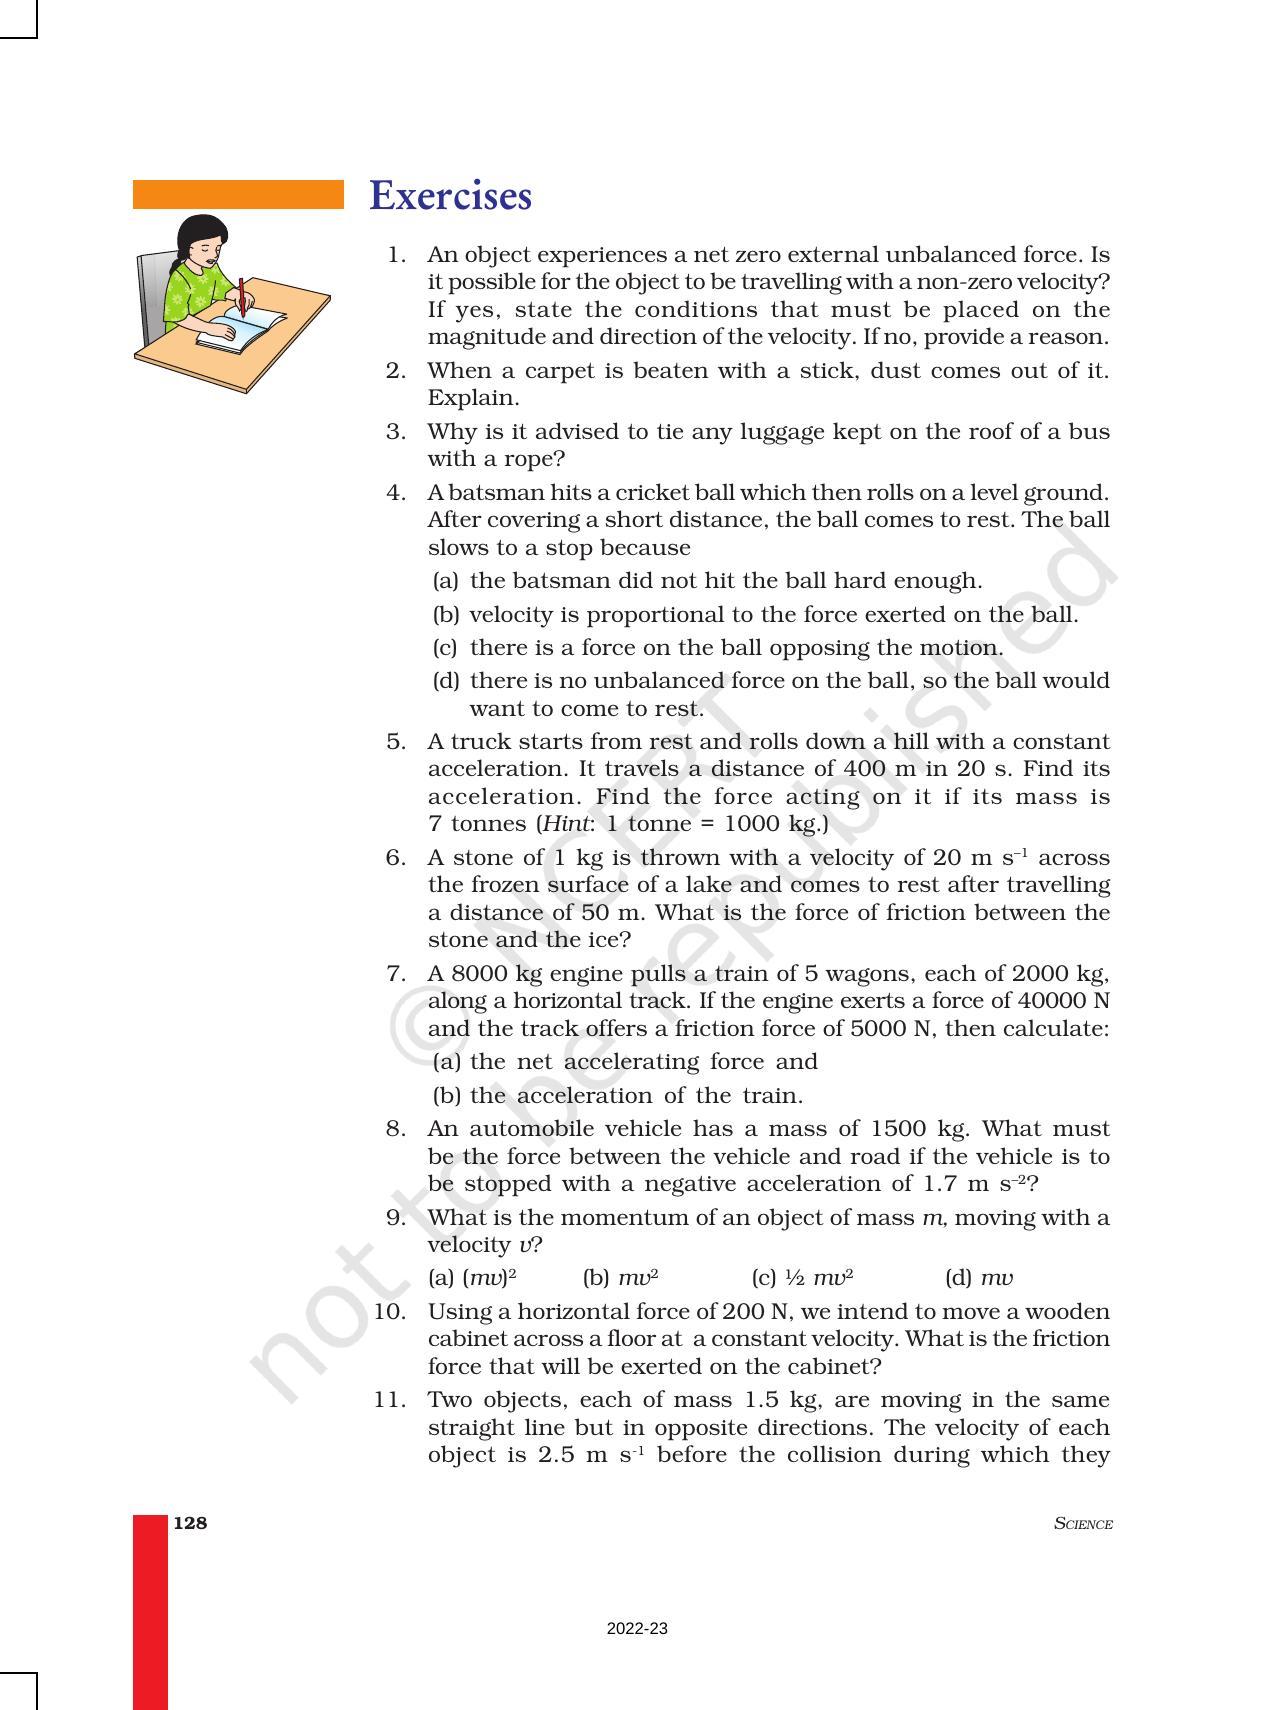 NCERT Book for Class 9 Science Chapter 9 Force And Laws Of Motion - Page 15